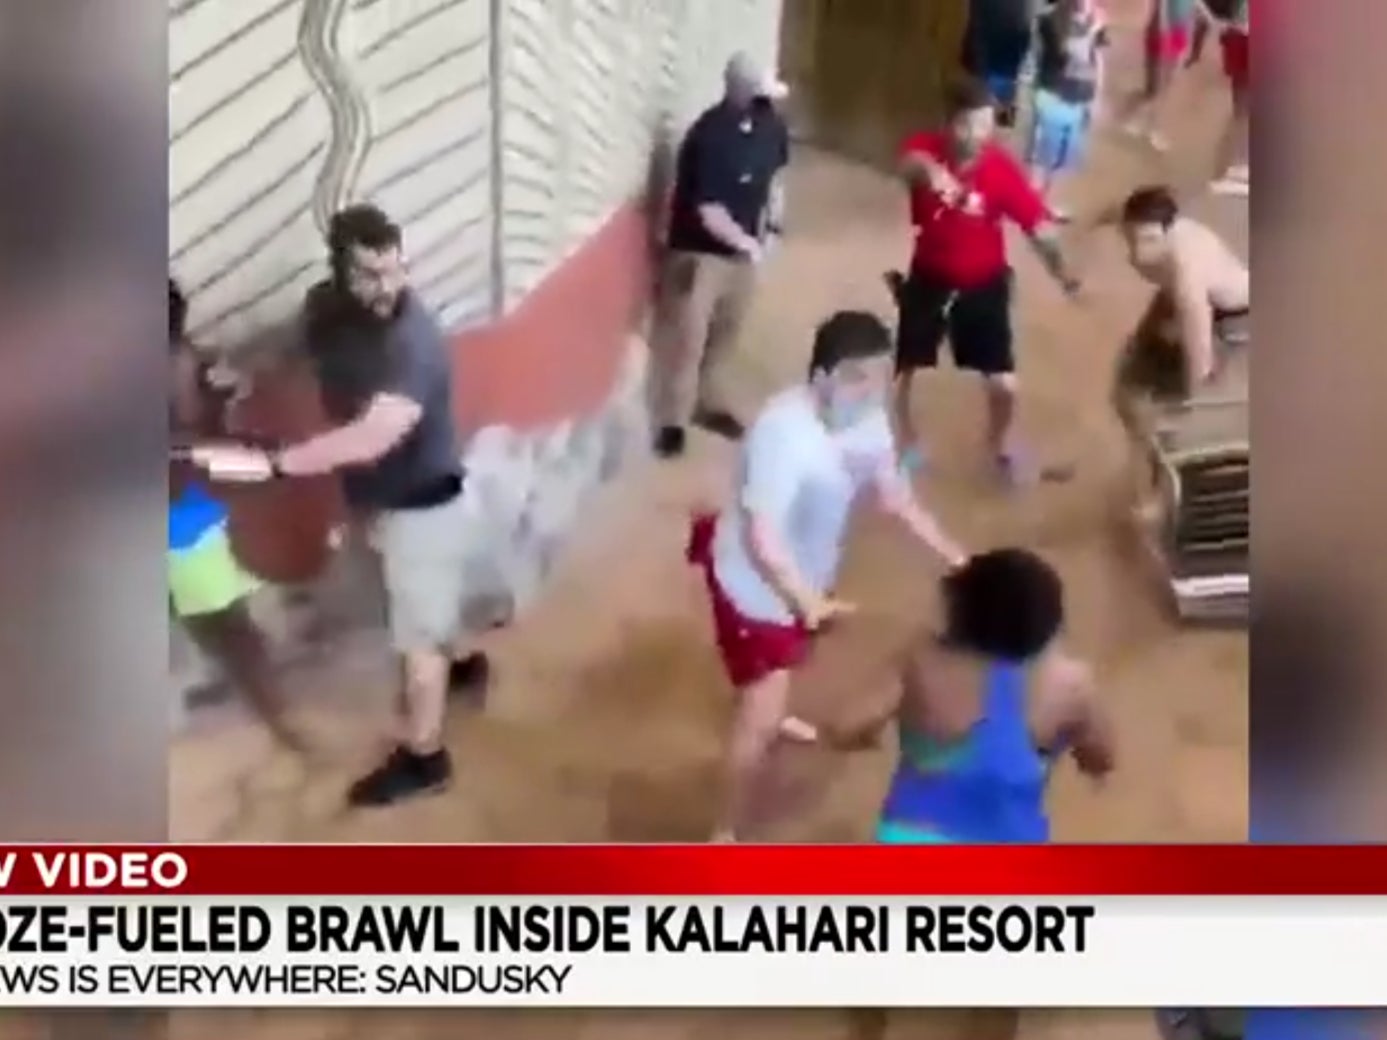 Image of a fight breaking out at Kalahari Water Park